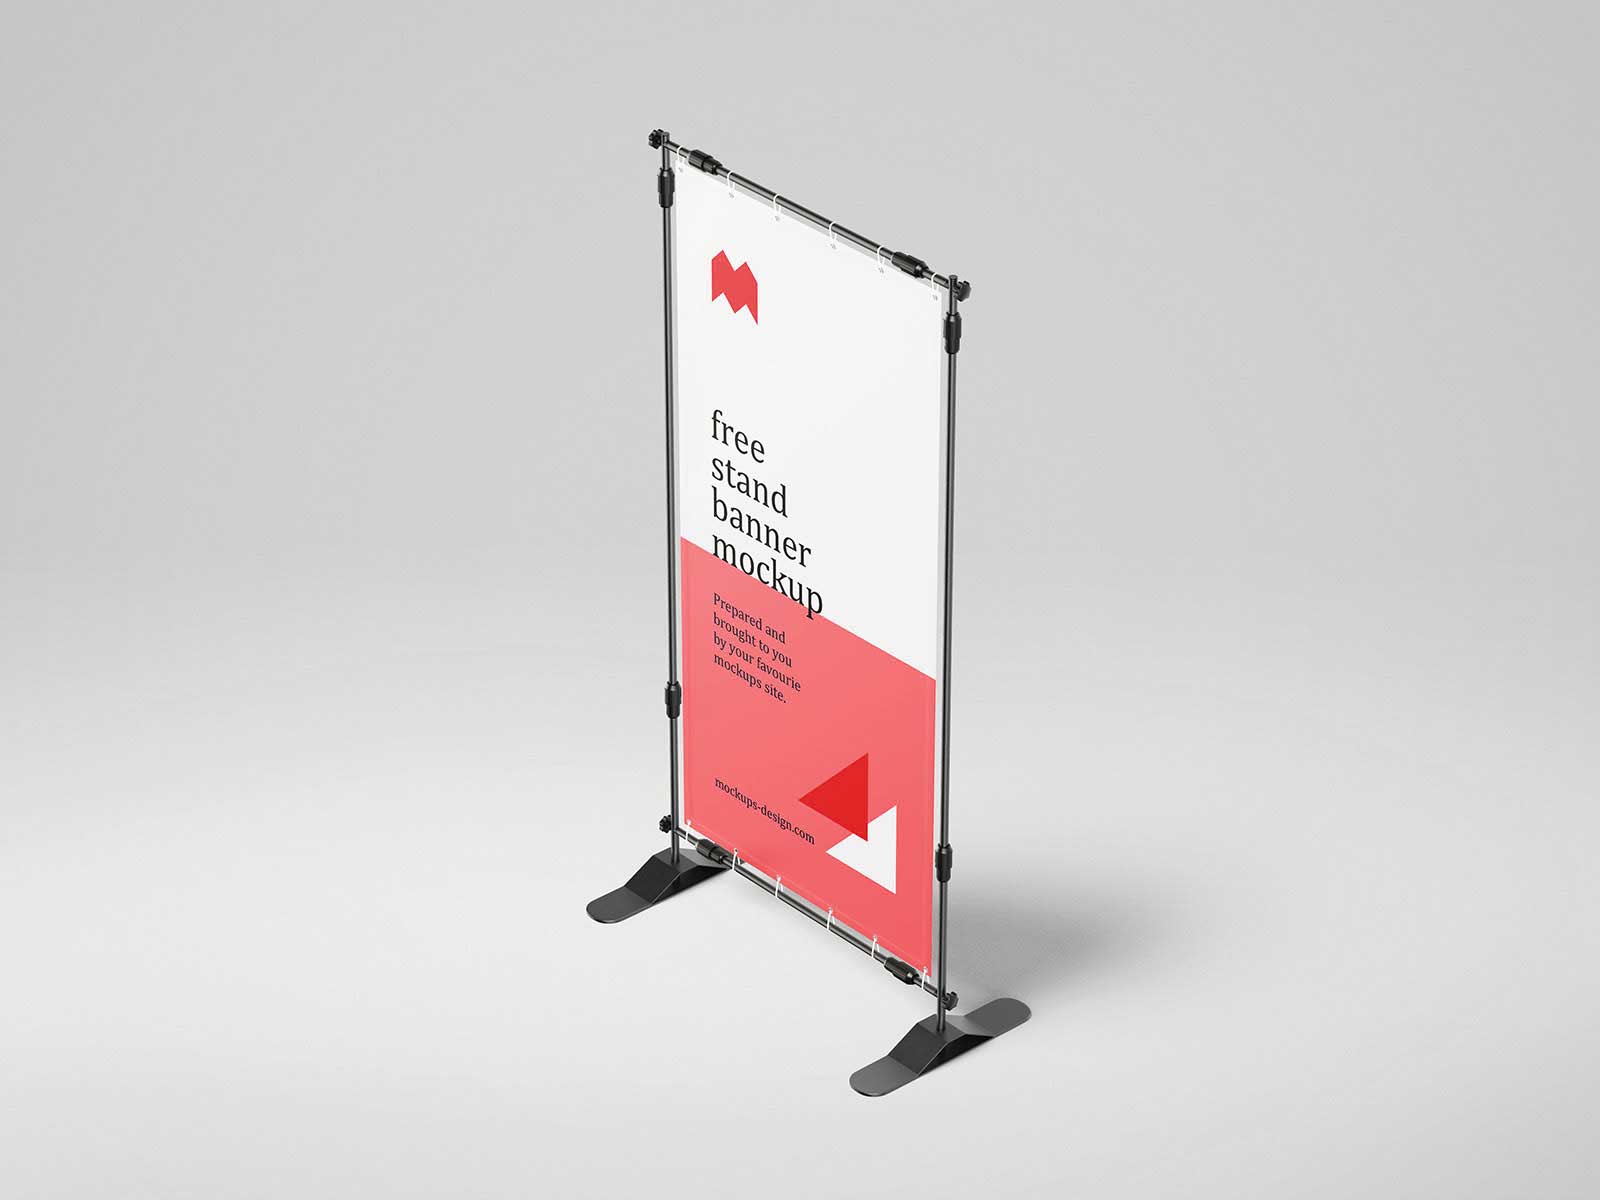 Free Banner Stand Mockups: Unleash Your Advertising Potential